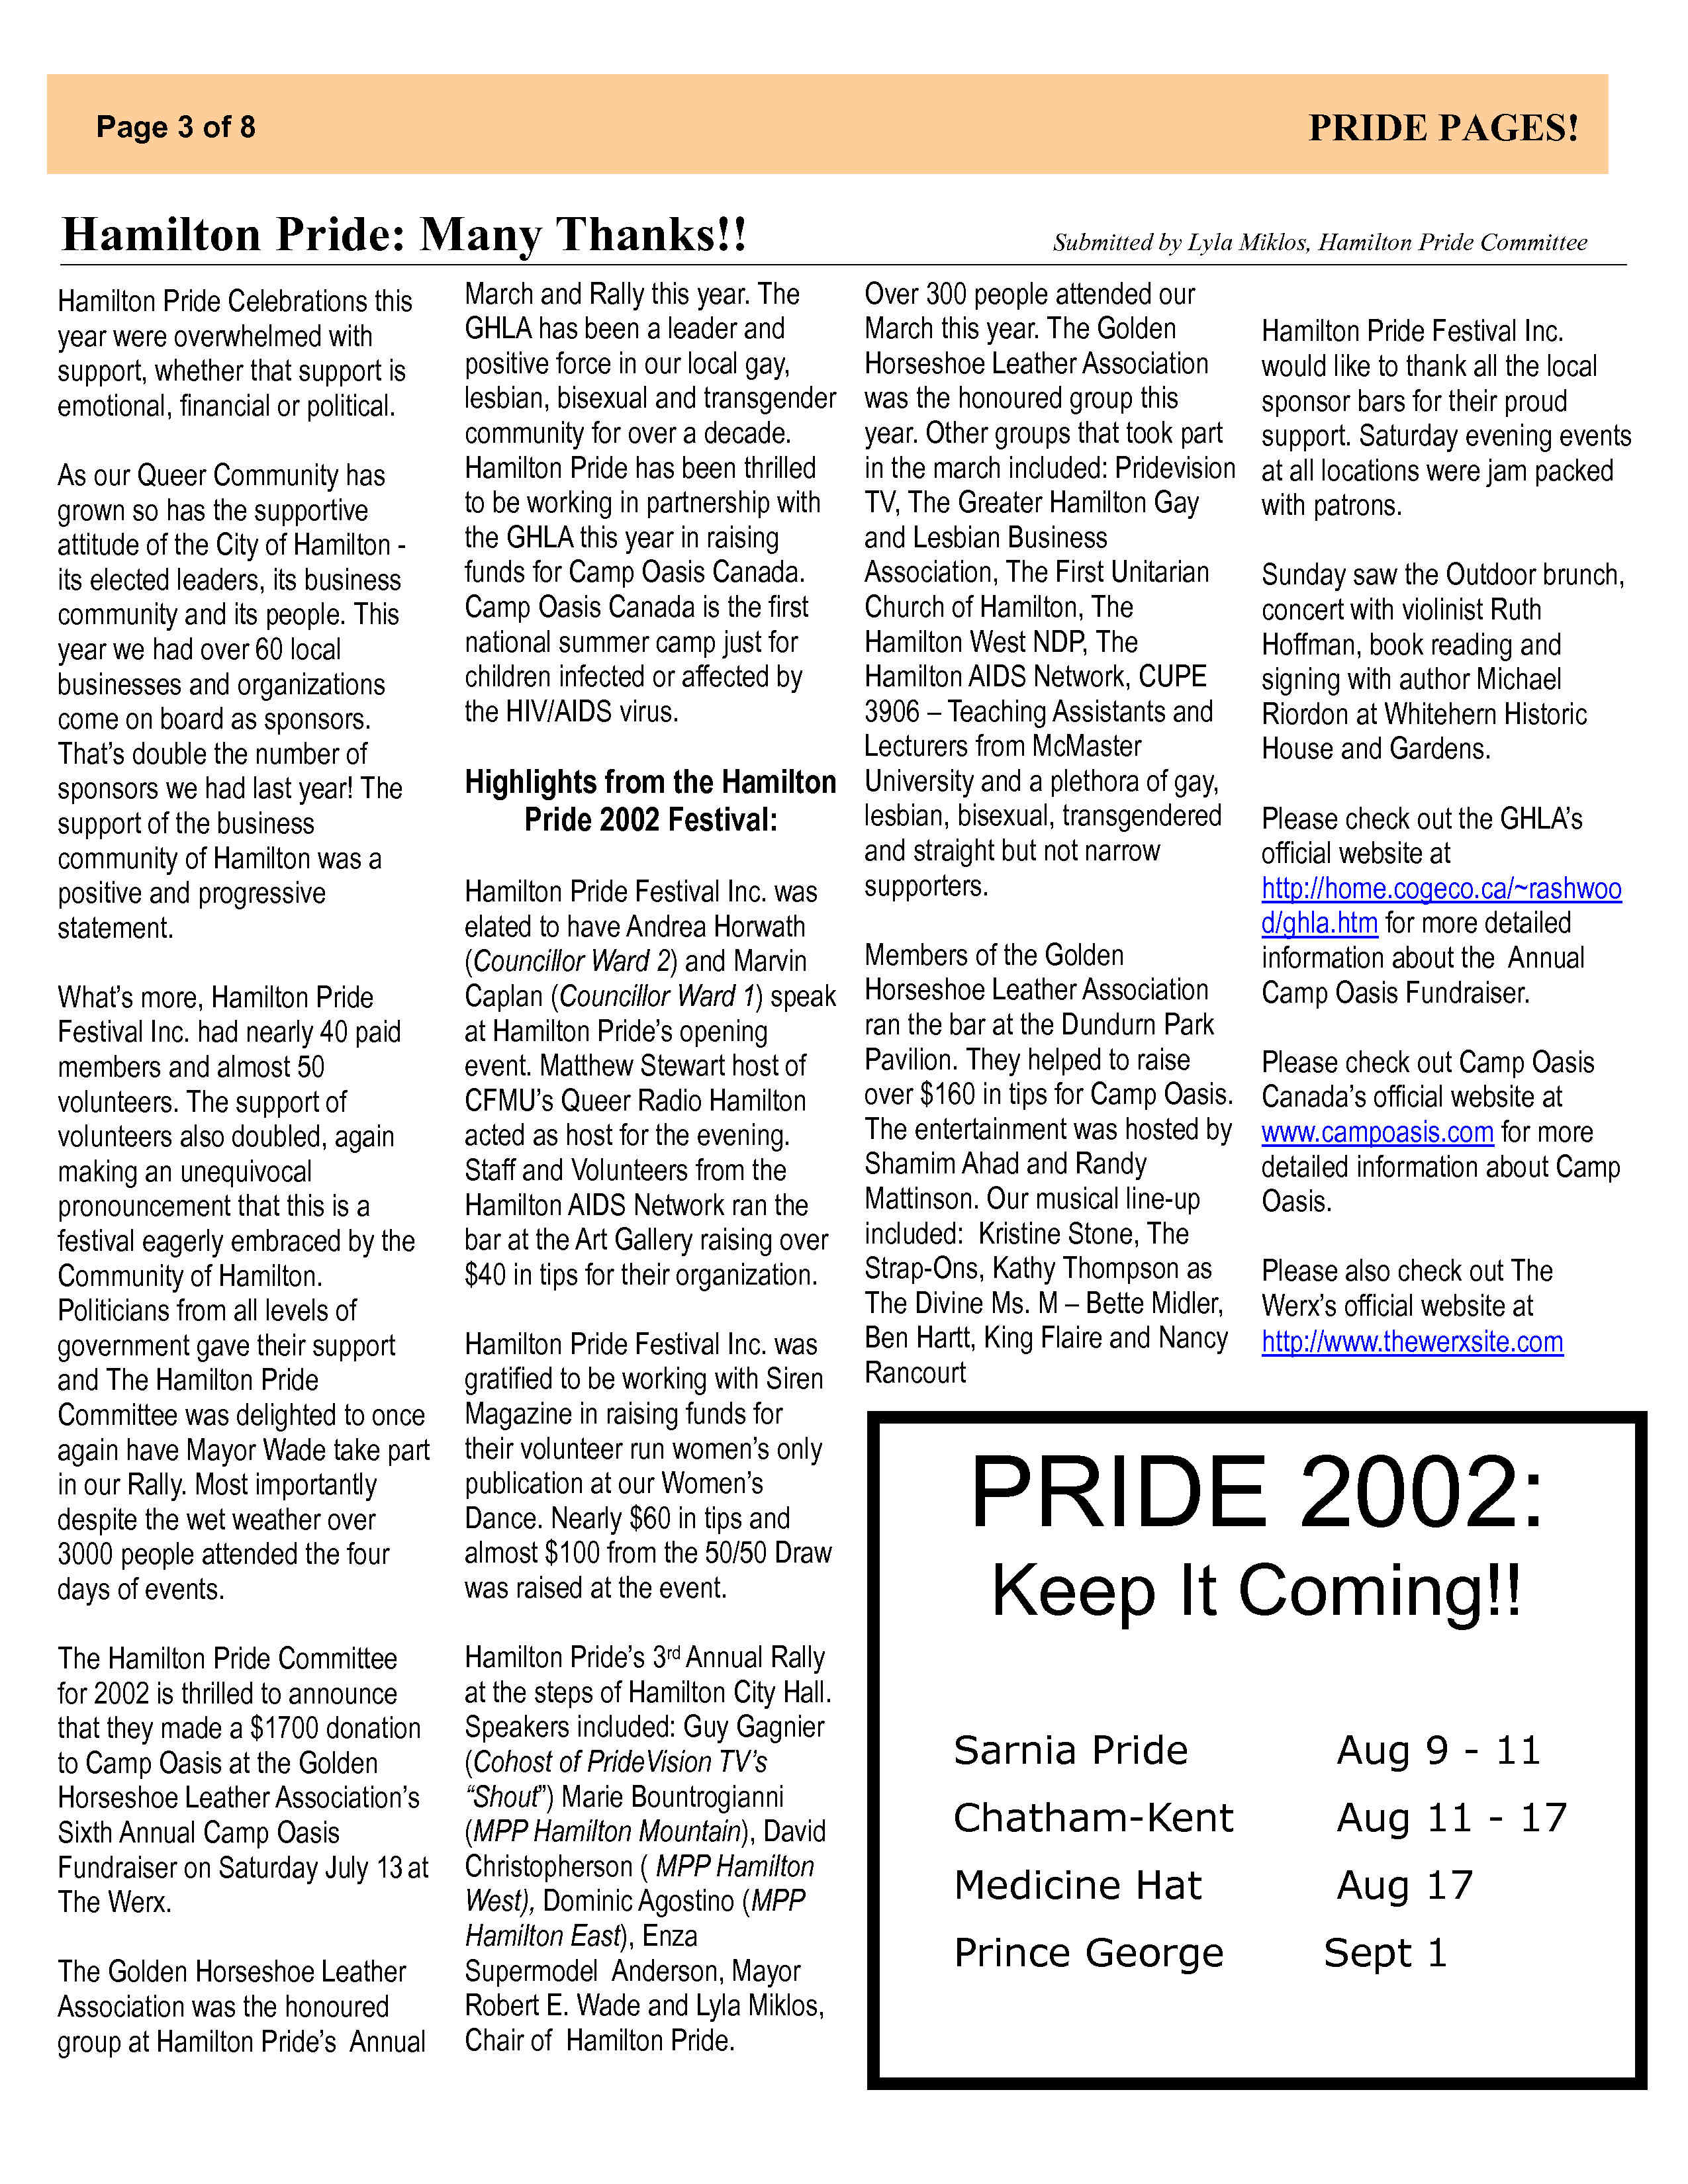 Pride Pages 2002-08 p3